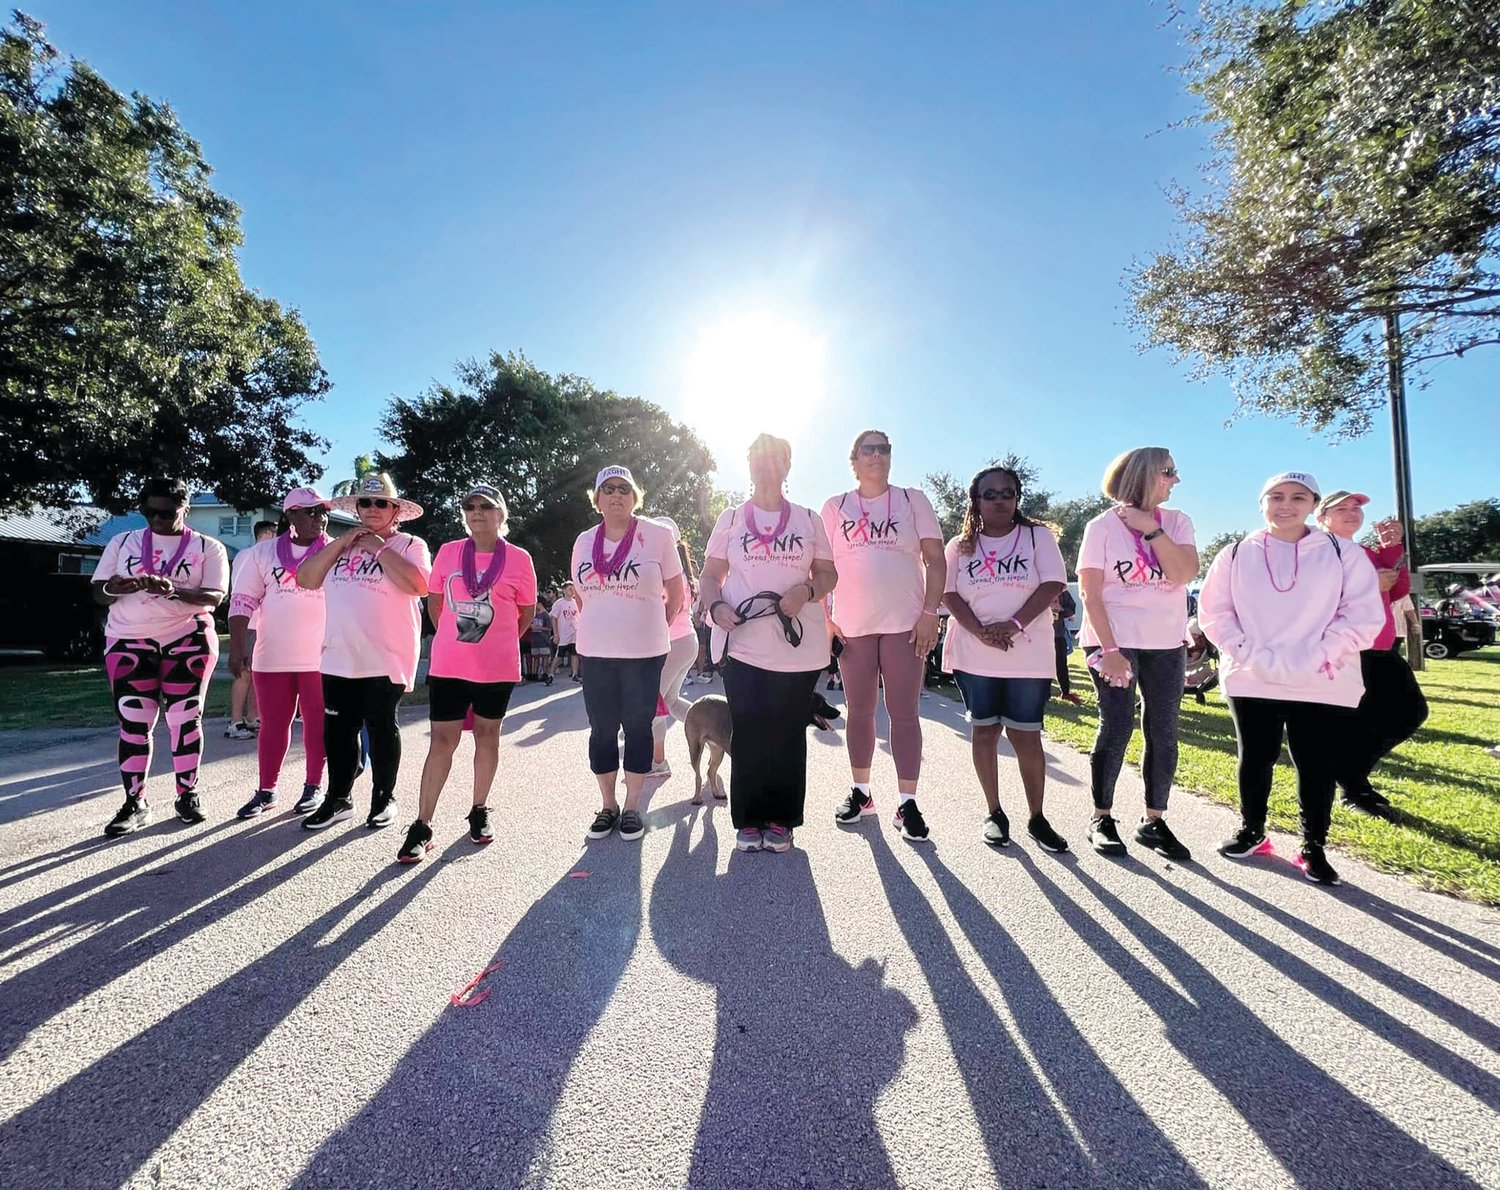 Bradshaw (3rd from Right) stands at the starting line of the Pink Warriors Walk along with other breast cancer survivors.